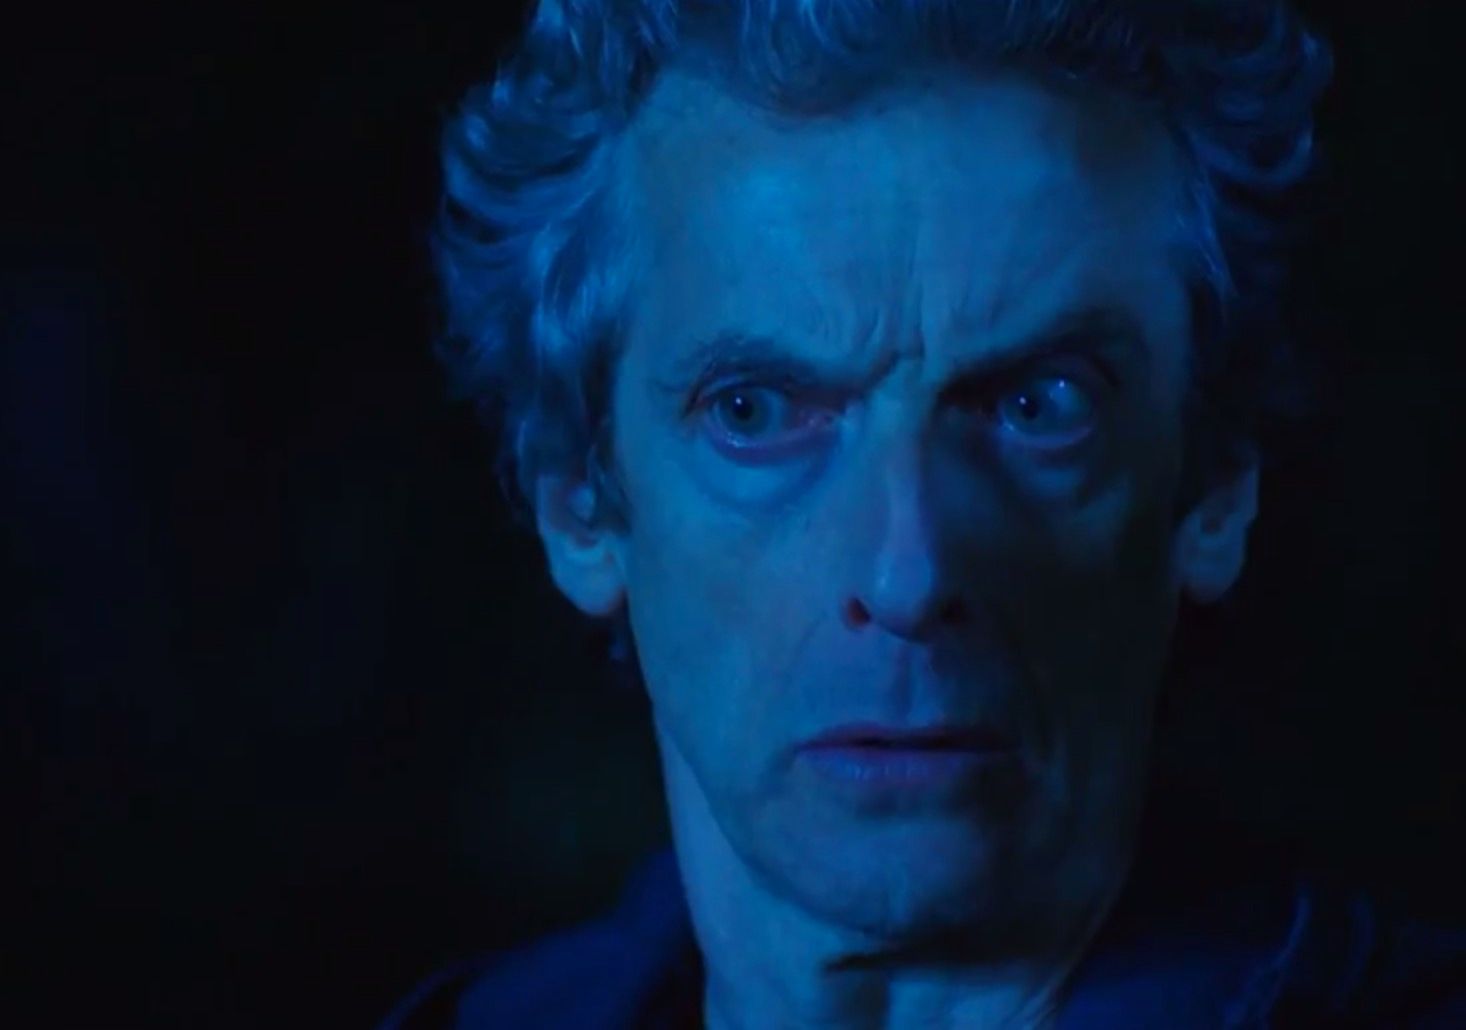 doctor who season 9 trailer debuts at comic con watch it here image 1